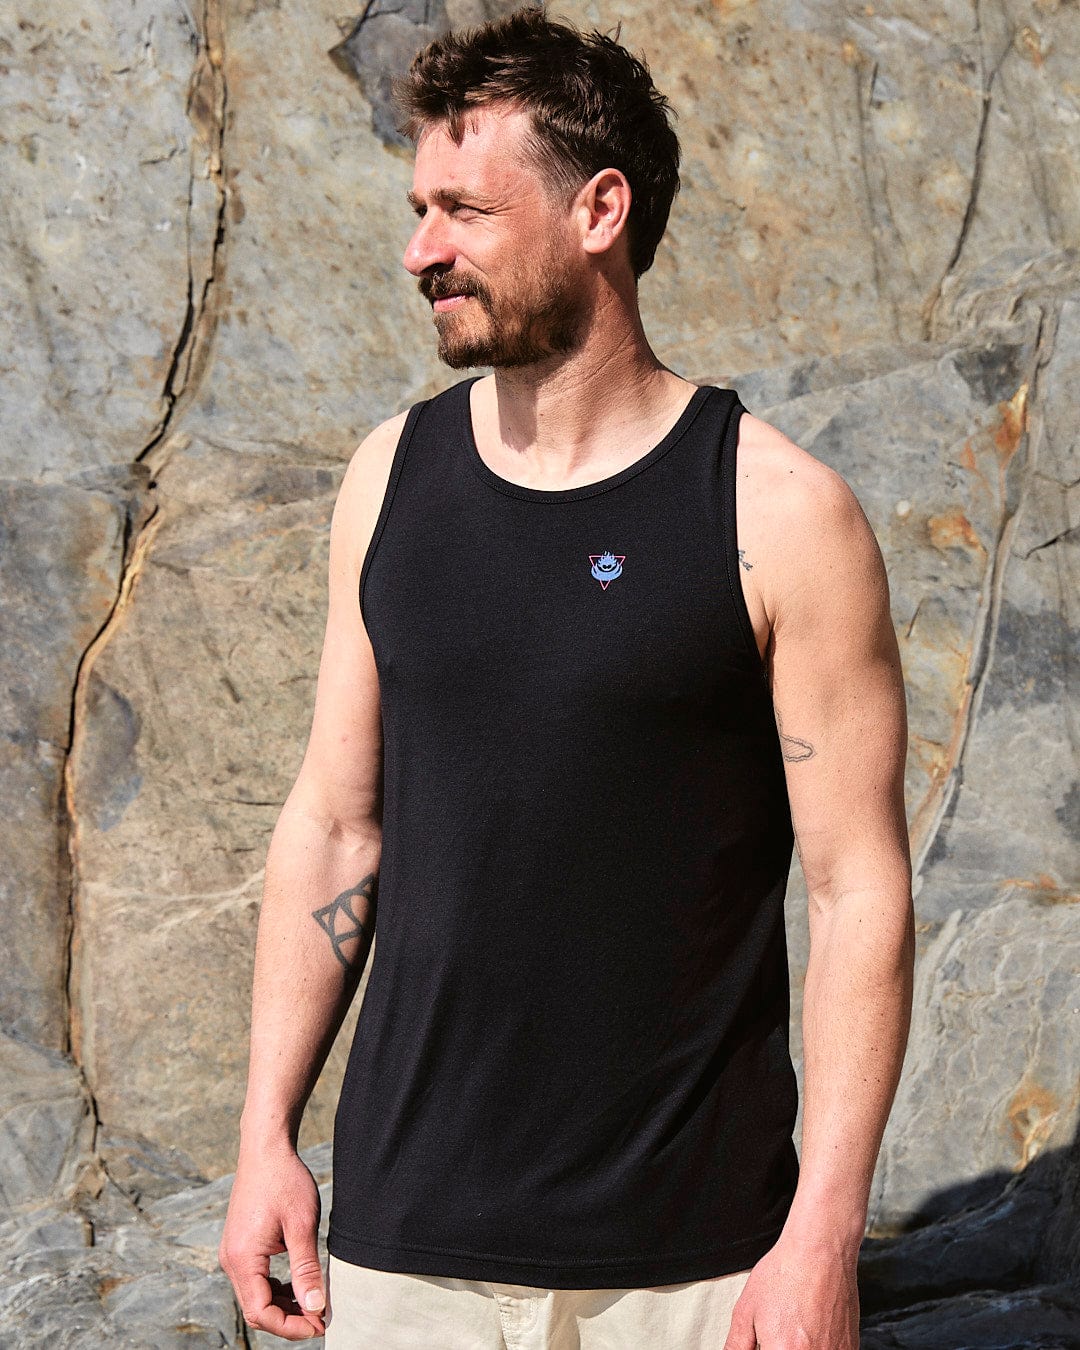 A man wearing a Saltrock Flame Tri - Mens Recycled Vest - Black tank top and tan shorts.